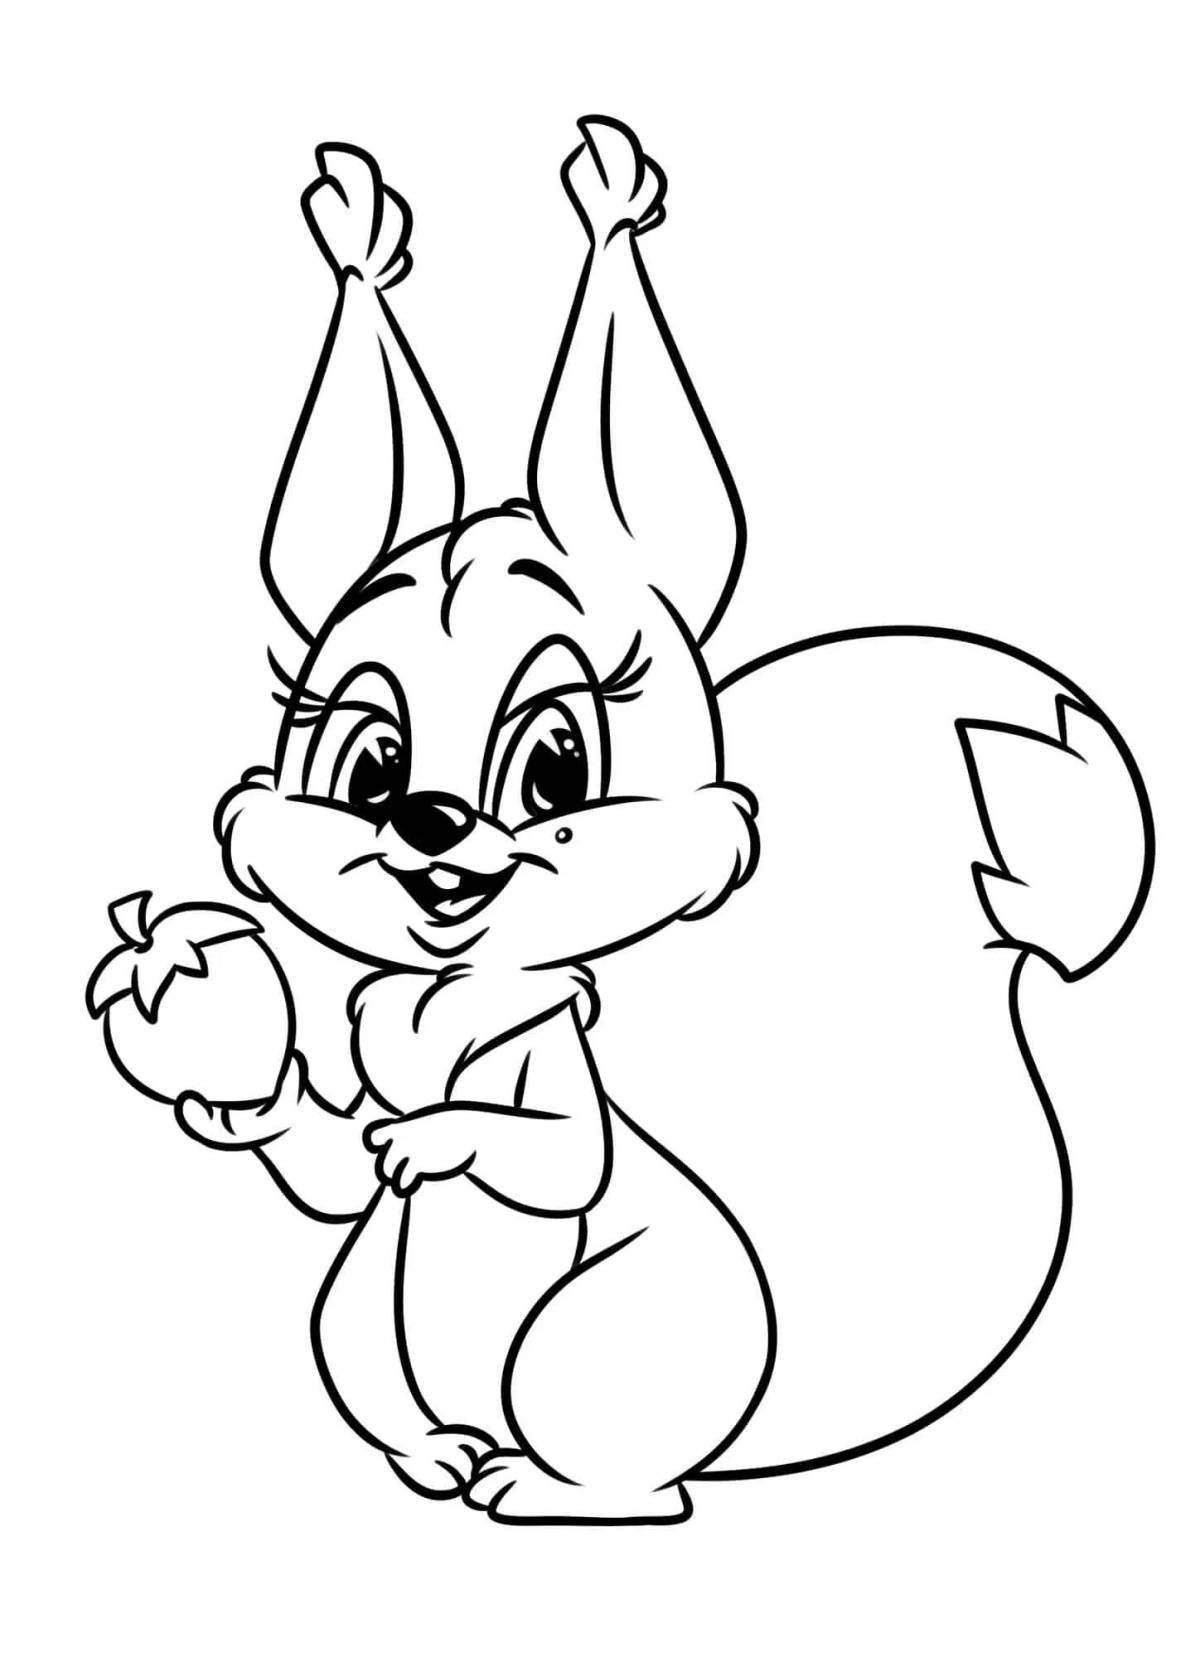 Playful rabbit and squirrel coloring book